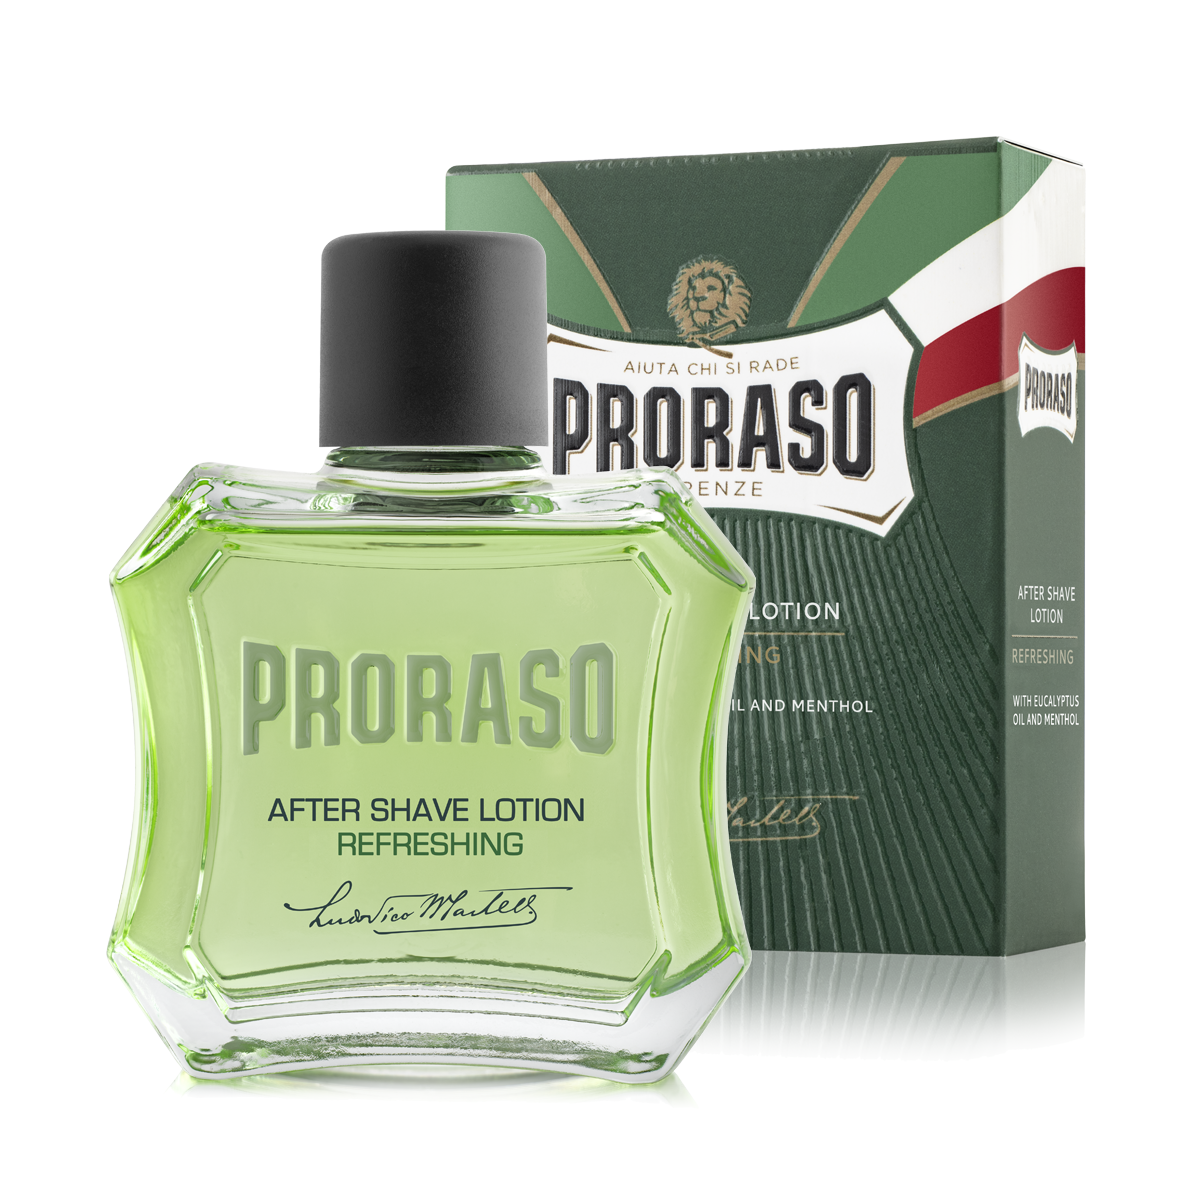 Proraso Refreshing & Toning Aftershave Lotion 100ml